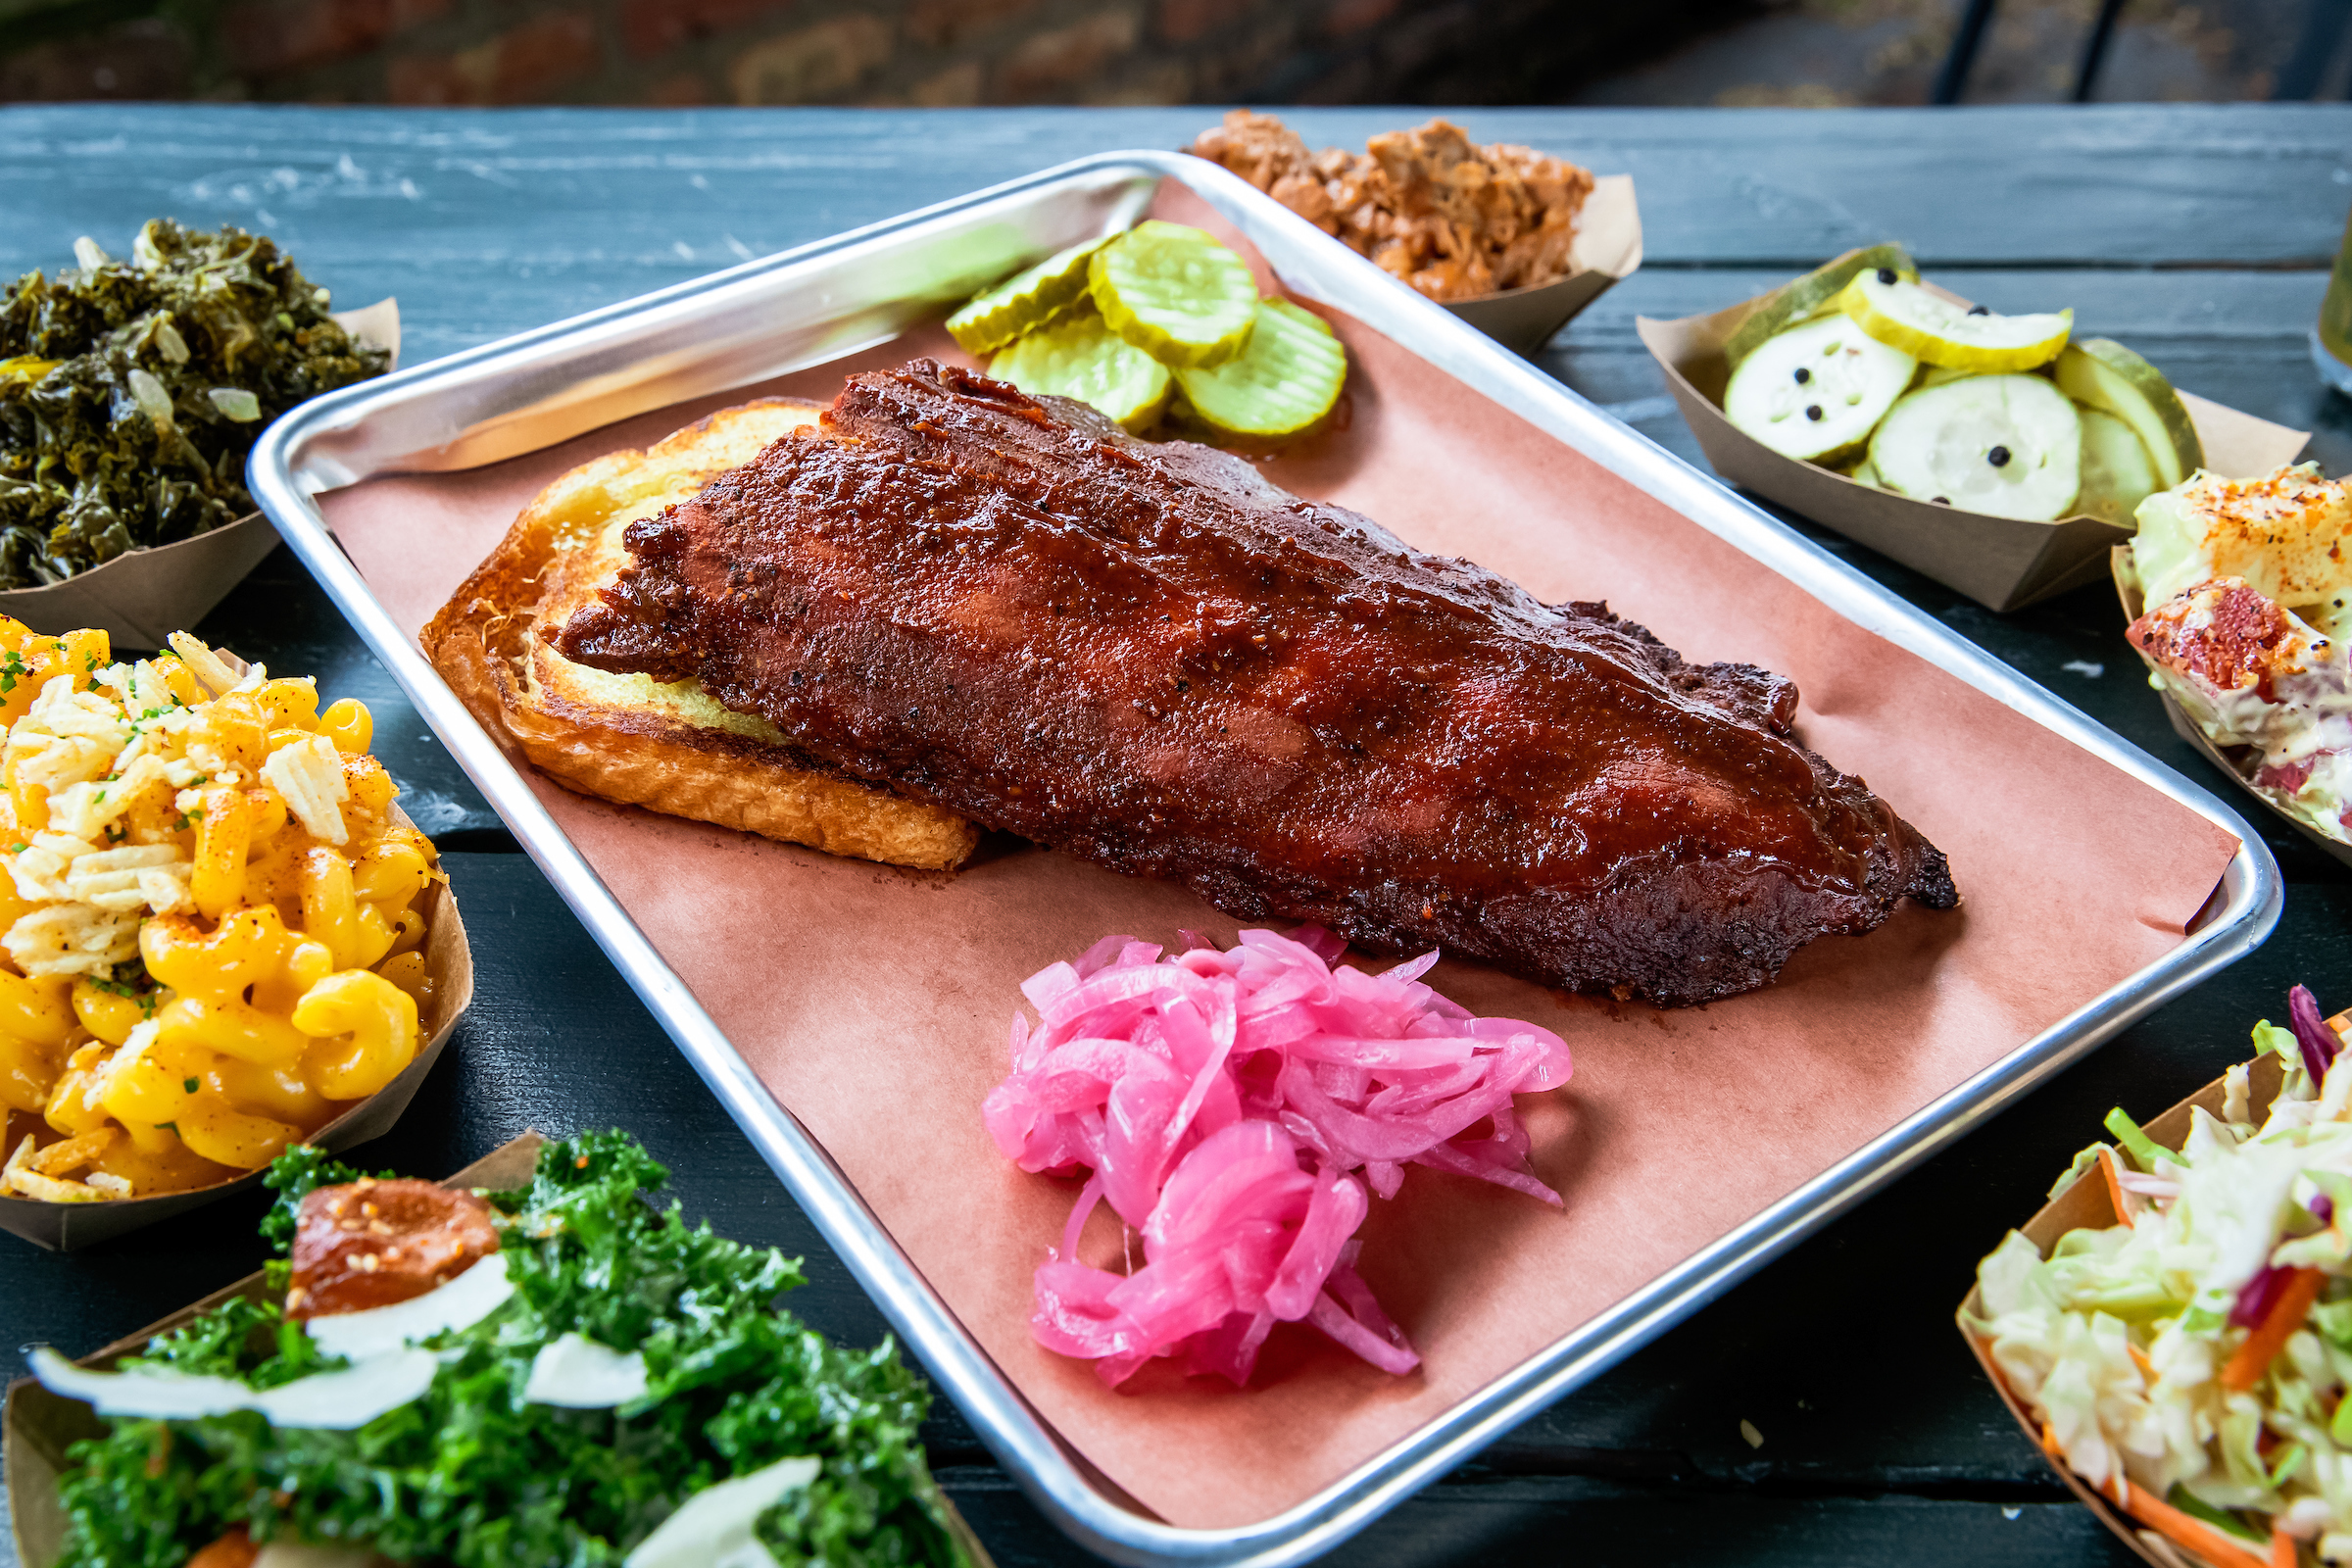 The 19 best barbecue restaurants in Chicago